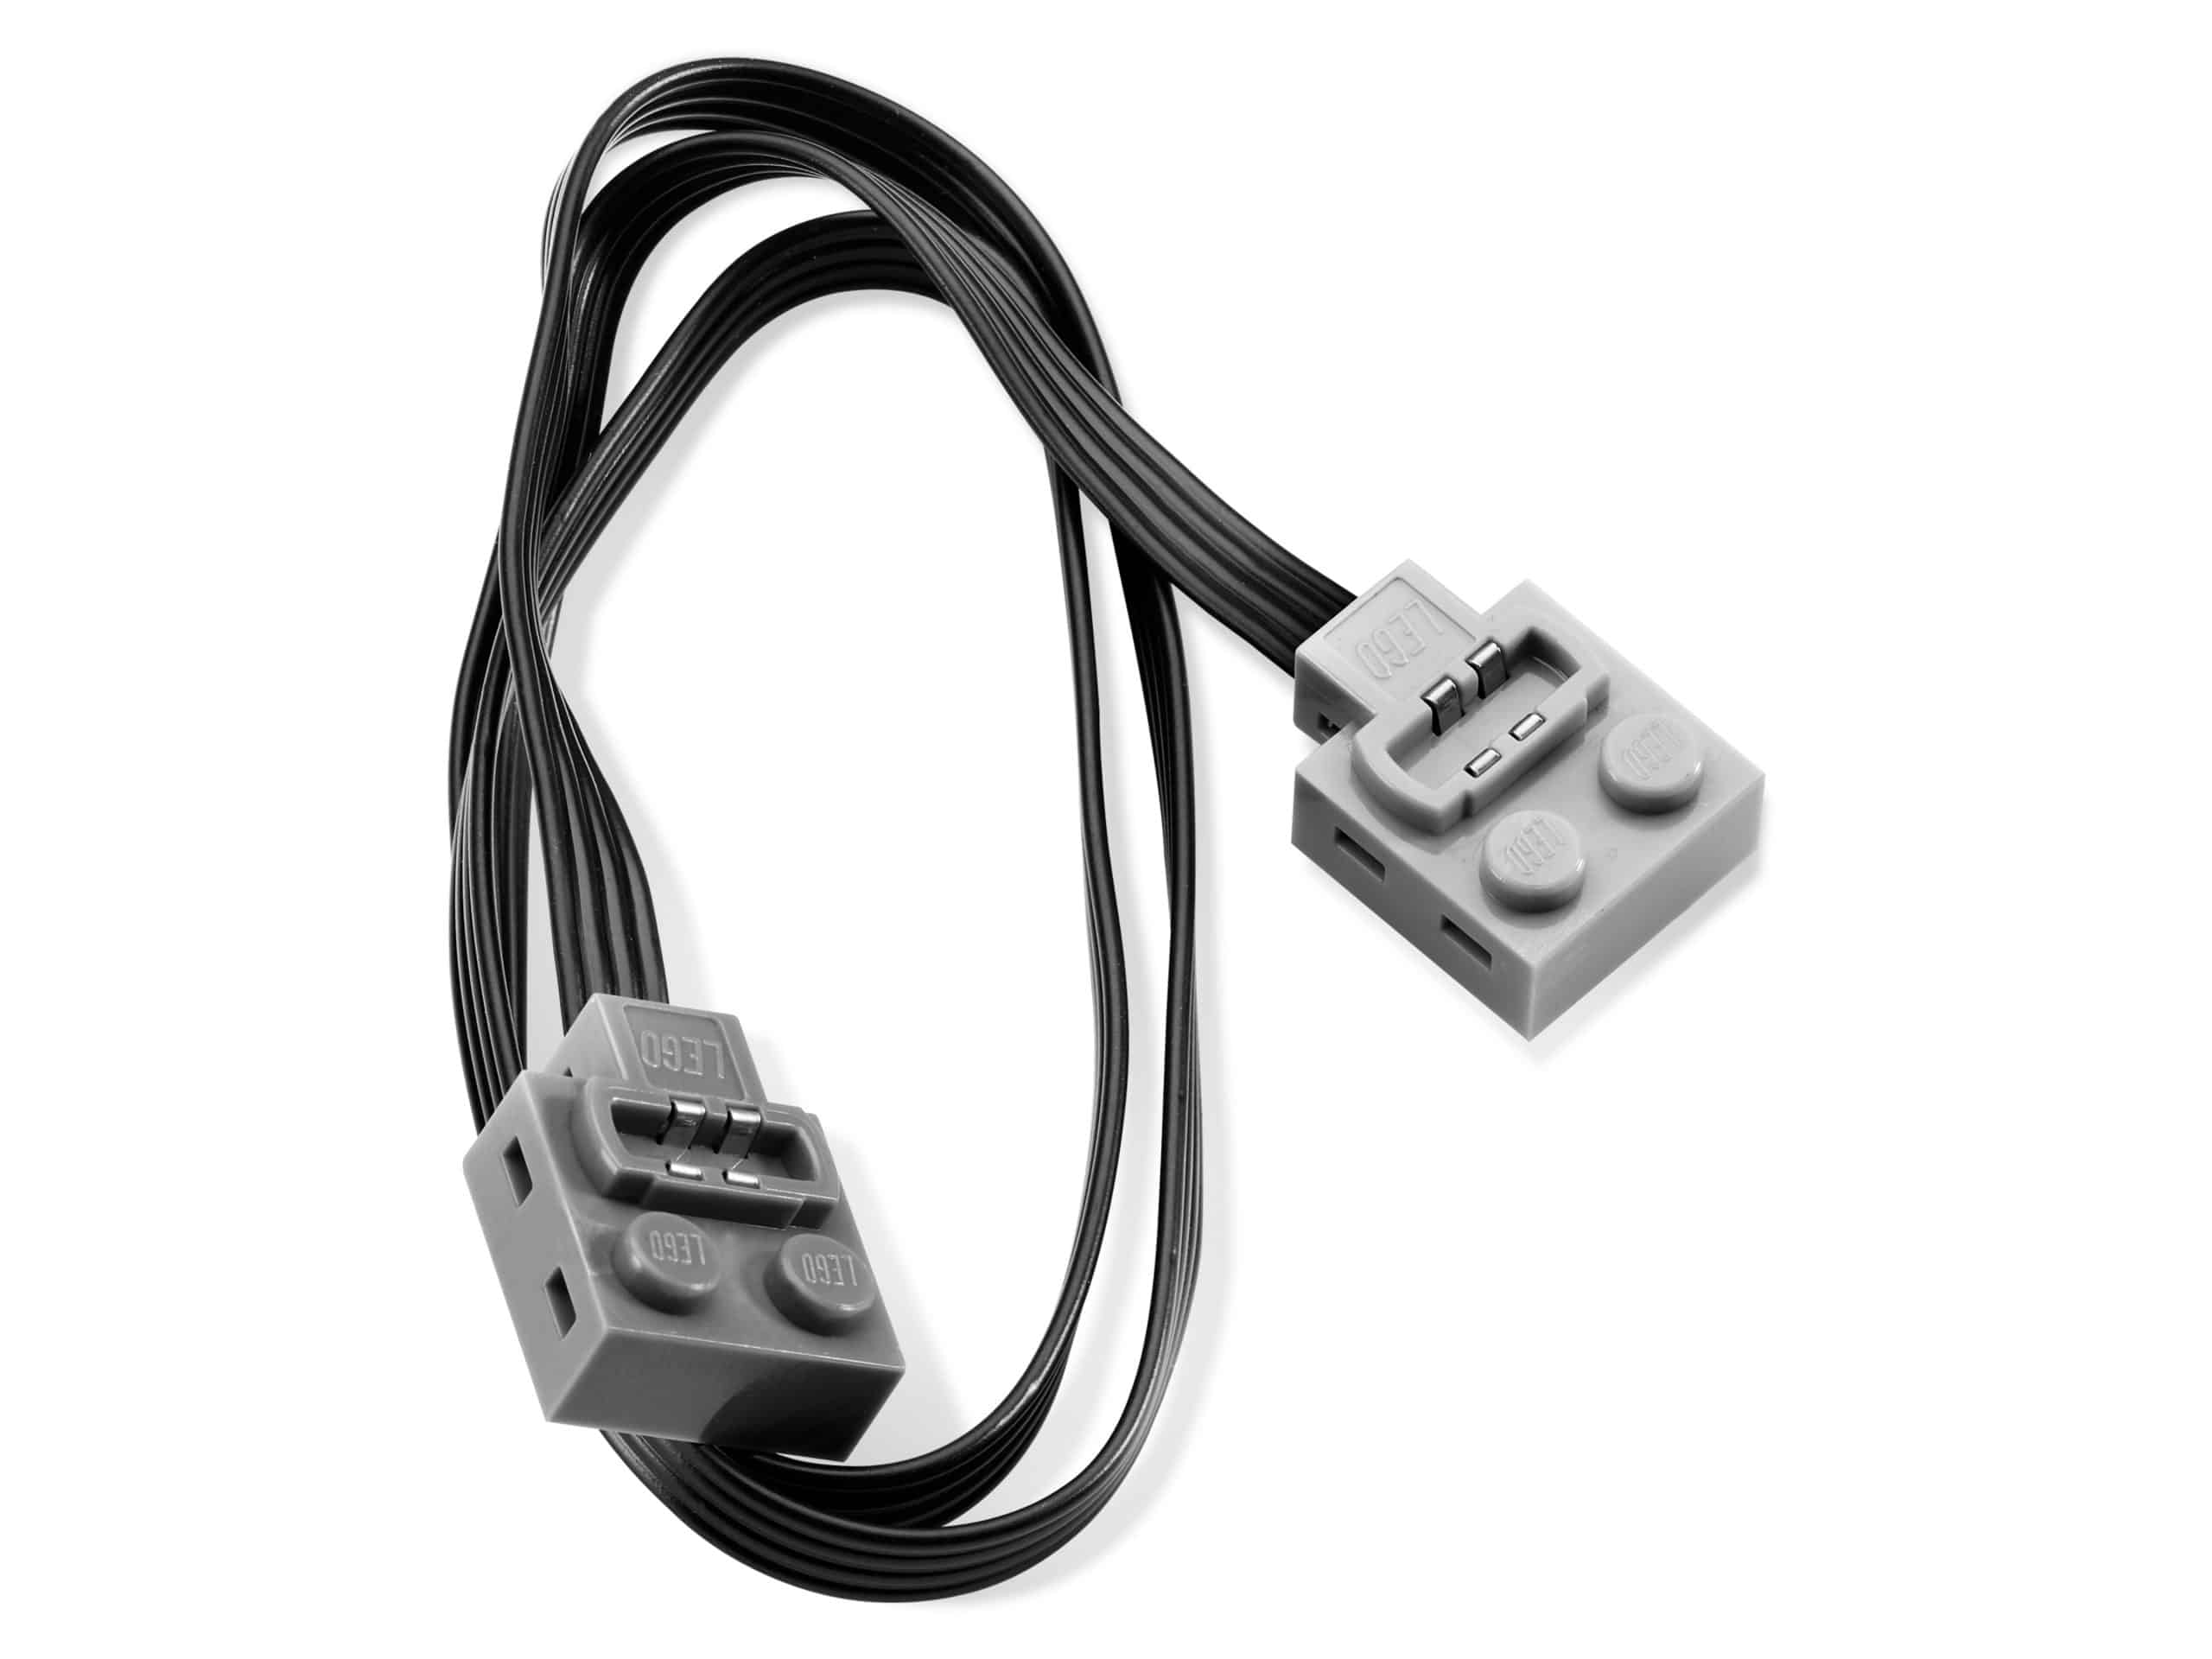 cable dextension power functions lego 8871 50 cm scaled